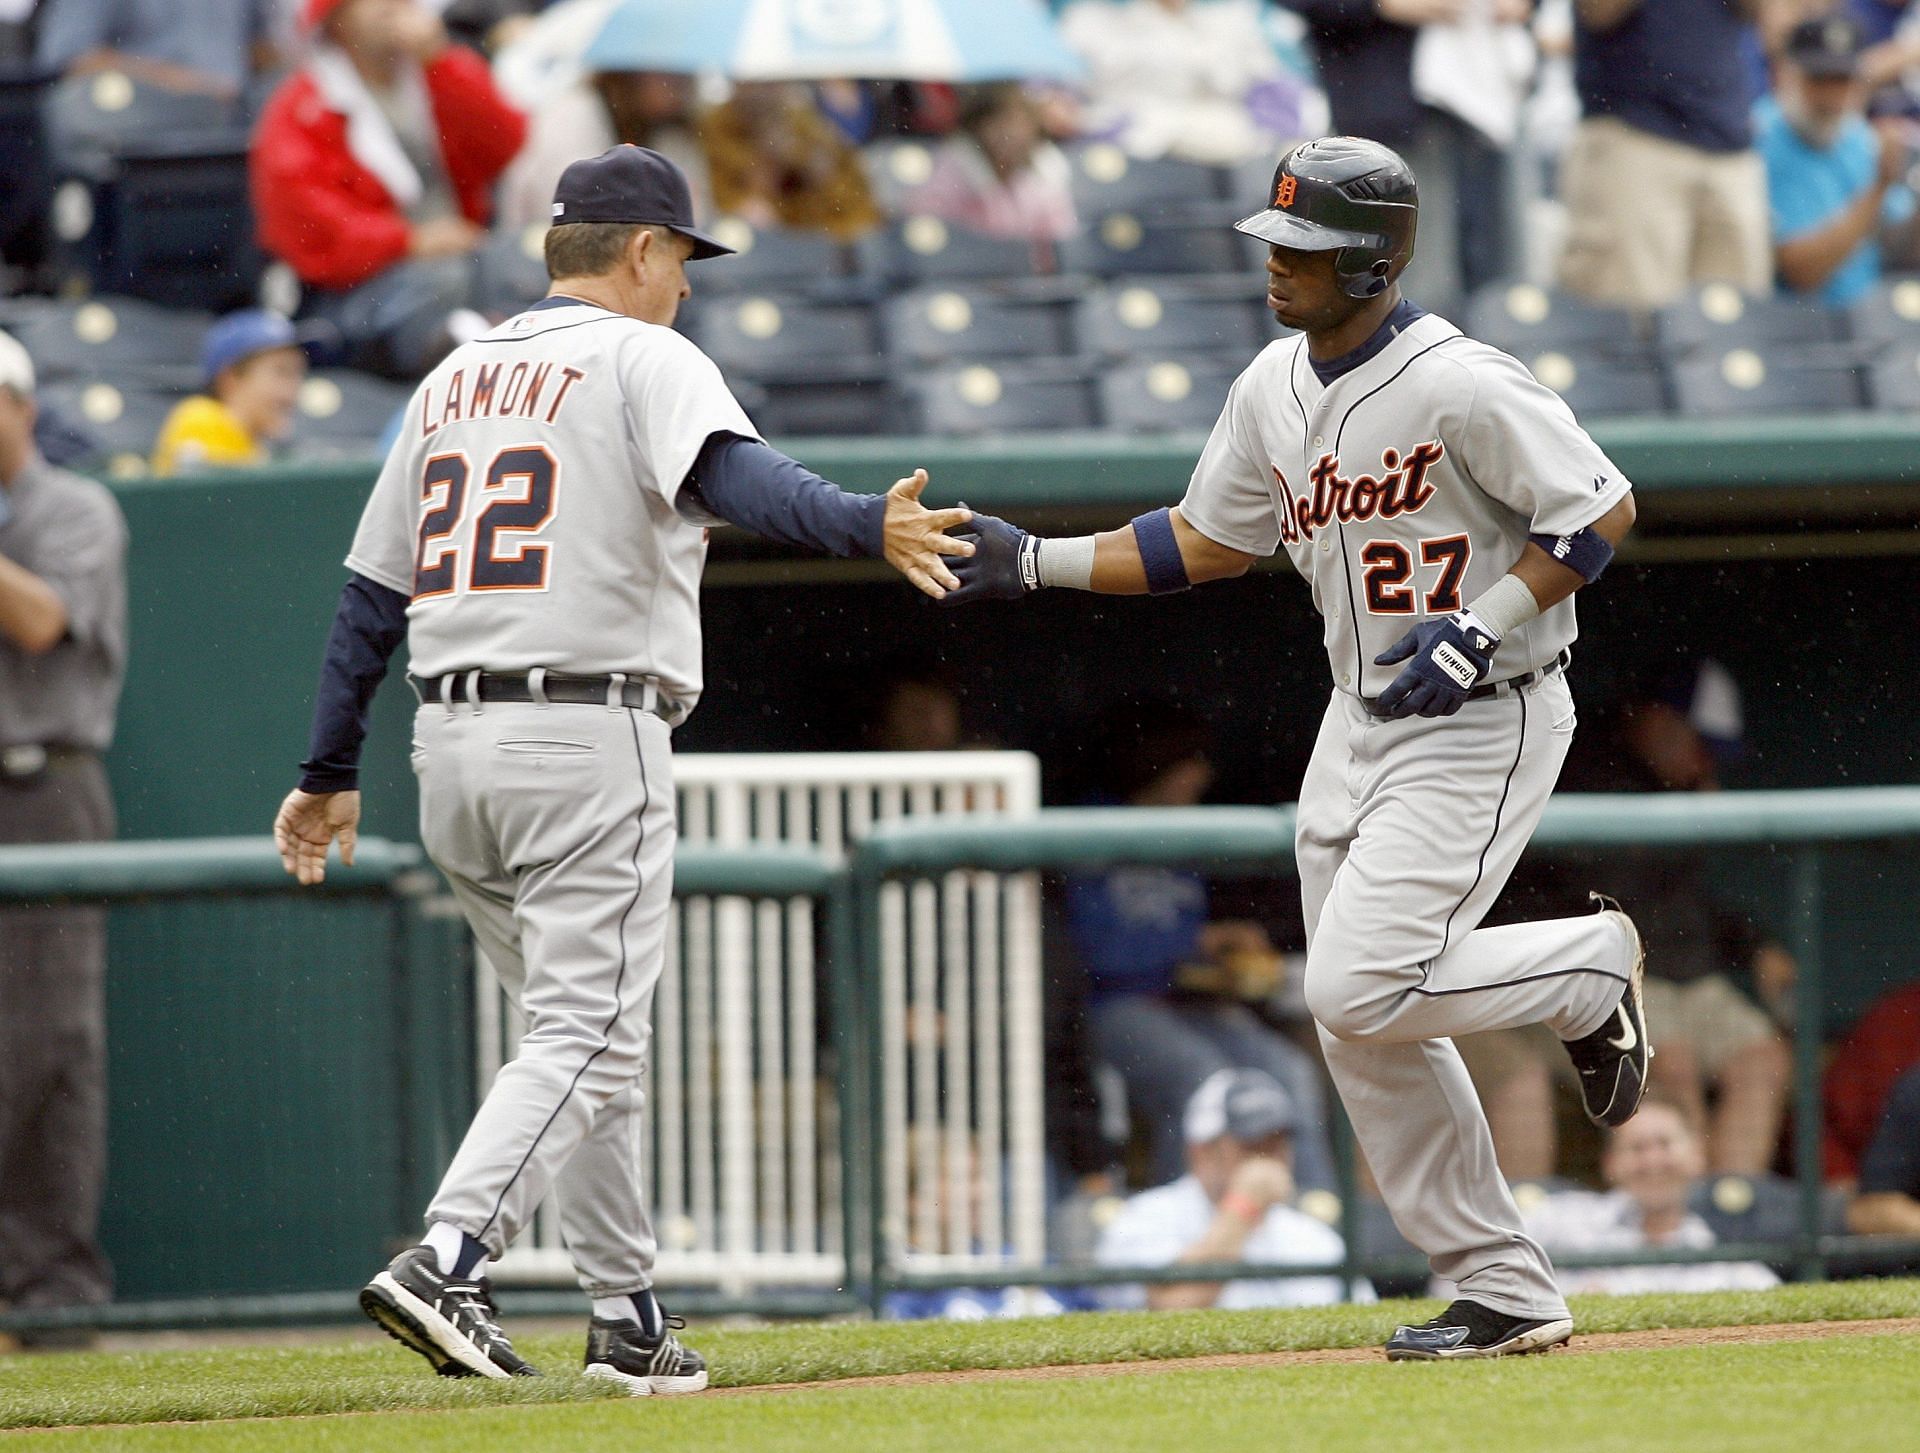 Detroit Tigers outfielder Craig Monroe homered in each of the first two games against the Cards